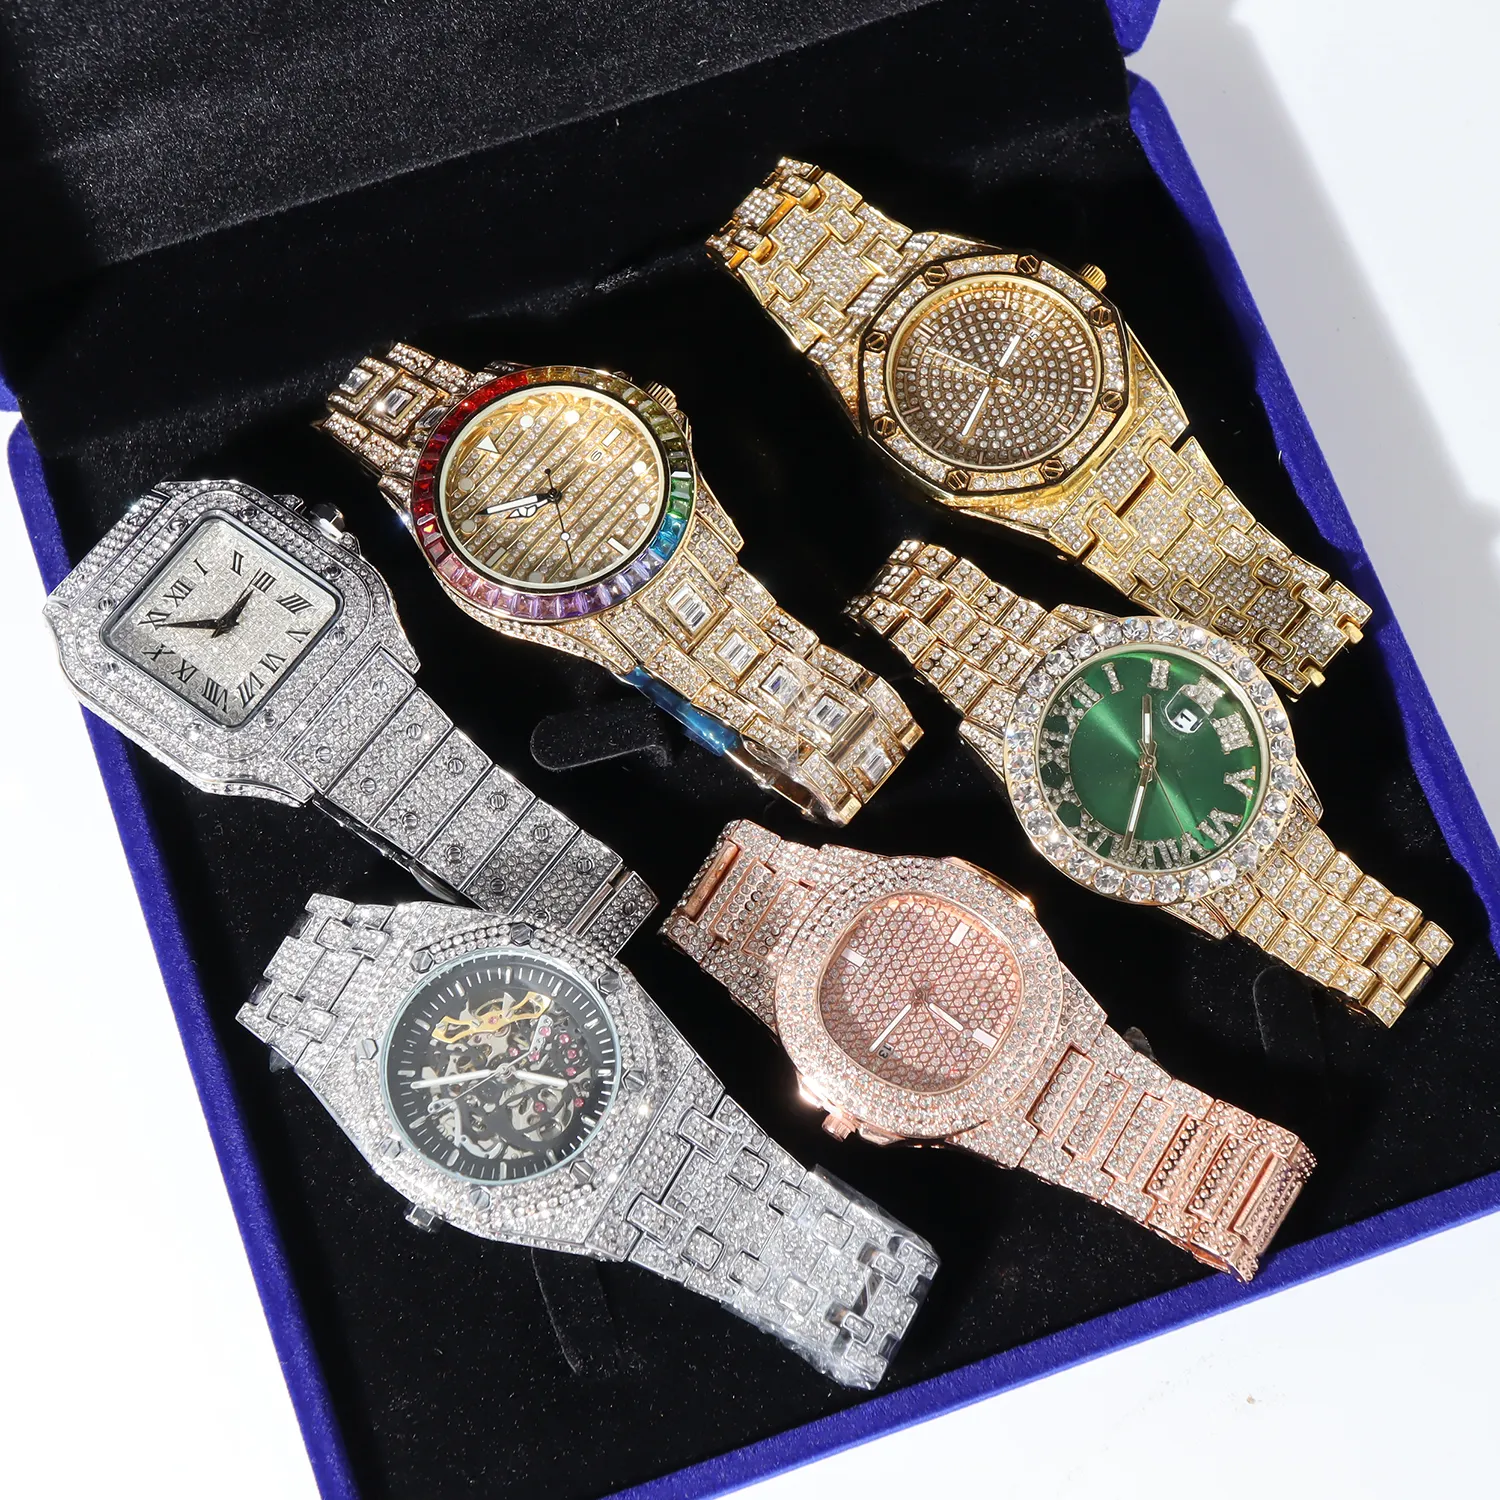 Gold Watch Men Luxury Brand Diamond Mens Watches Top Brand Luxury Iced Out Male Quartz Watch Calender Unique Gift For Men